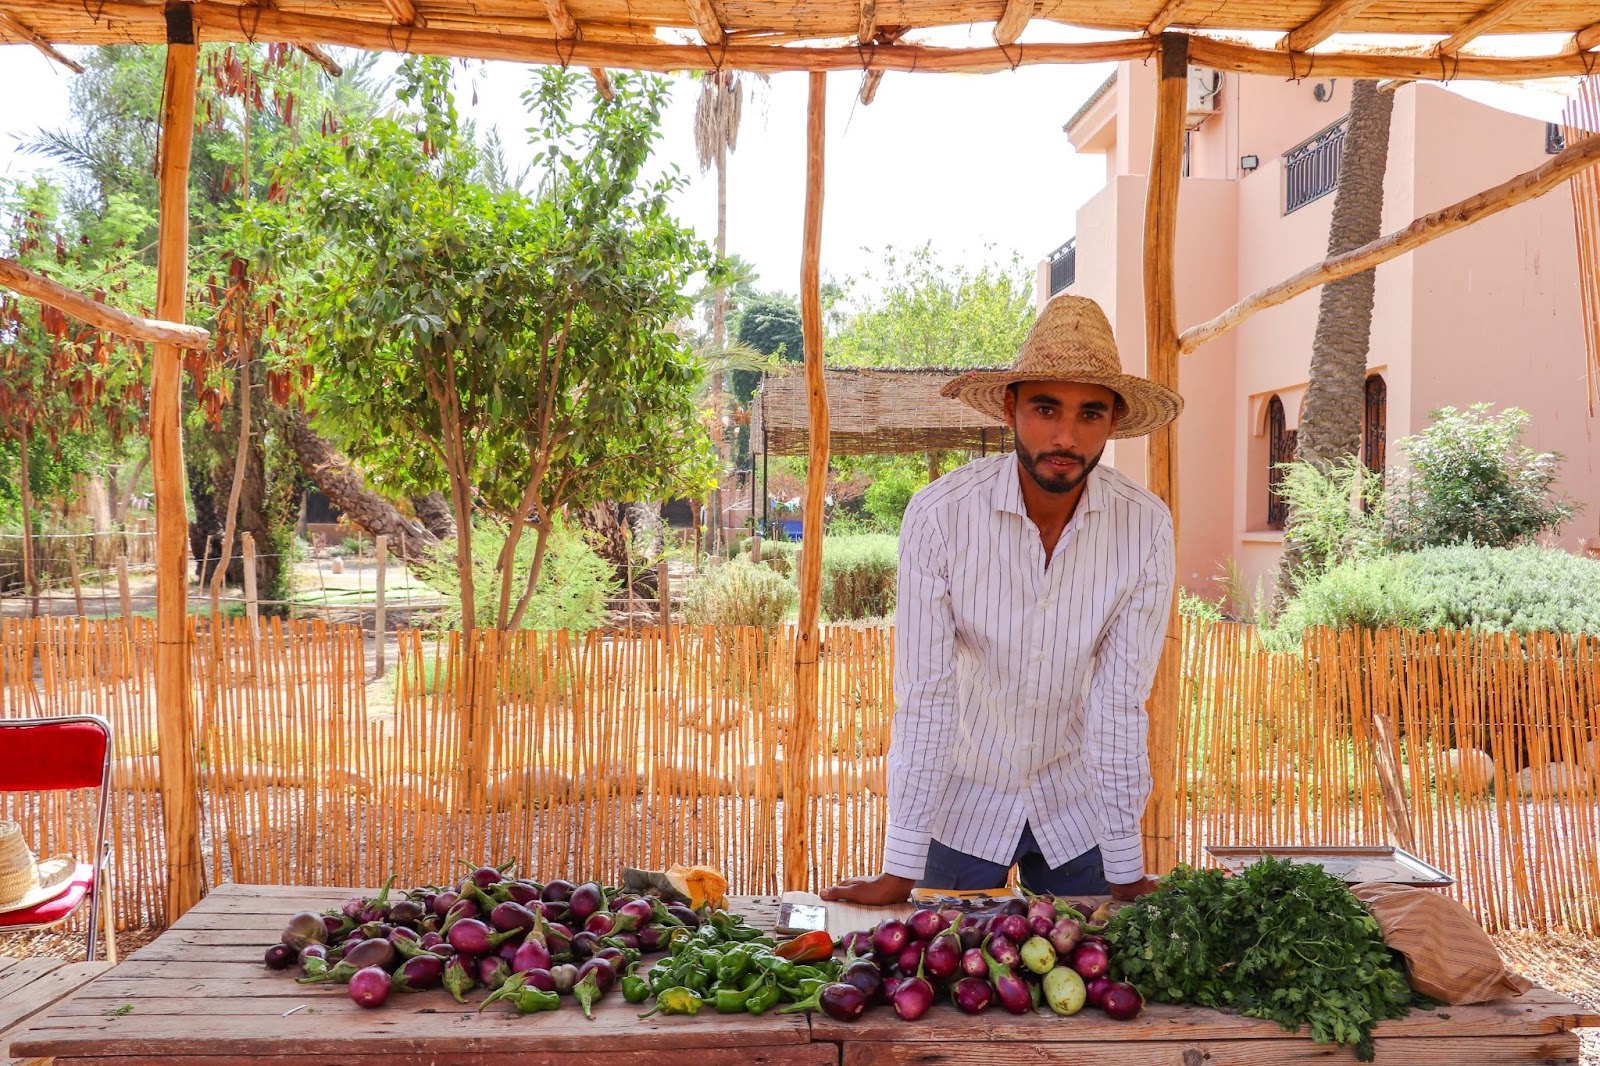 Celebrating World Food Day with second High Atlas Food Market